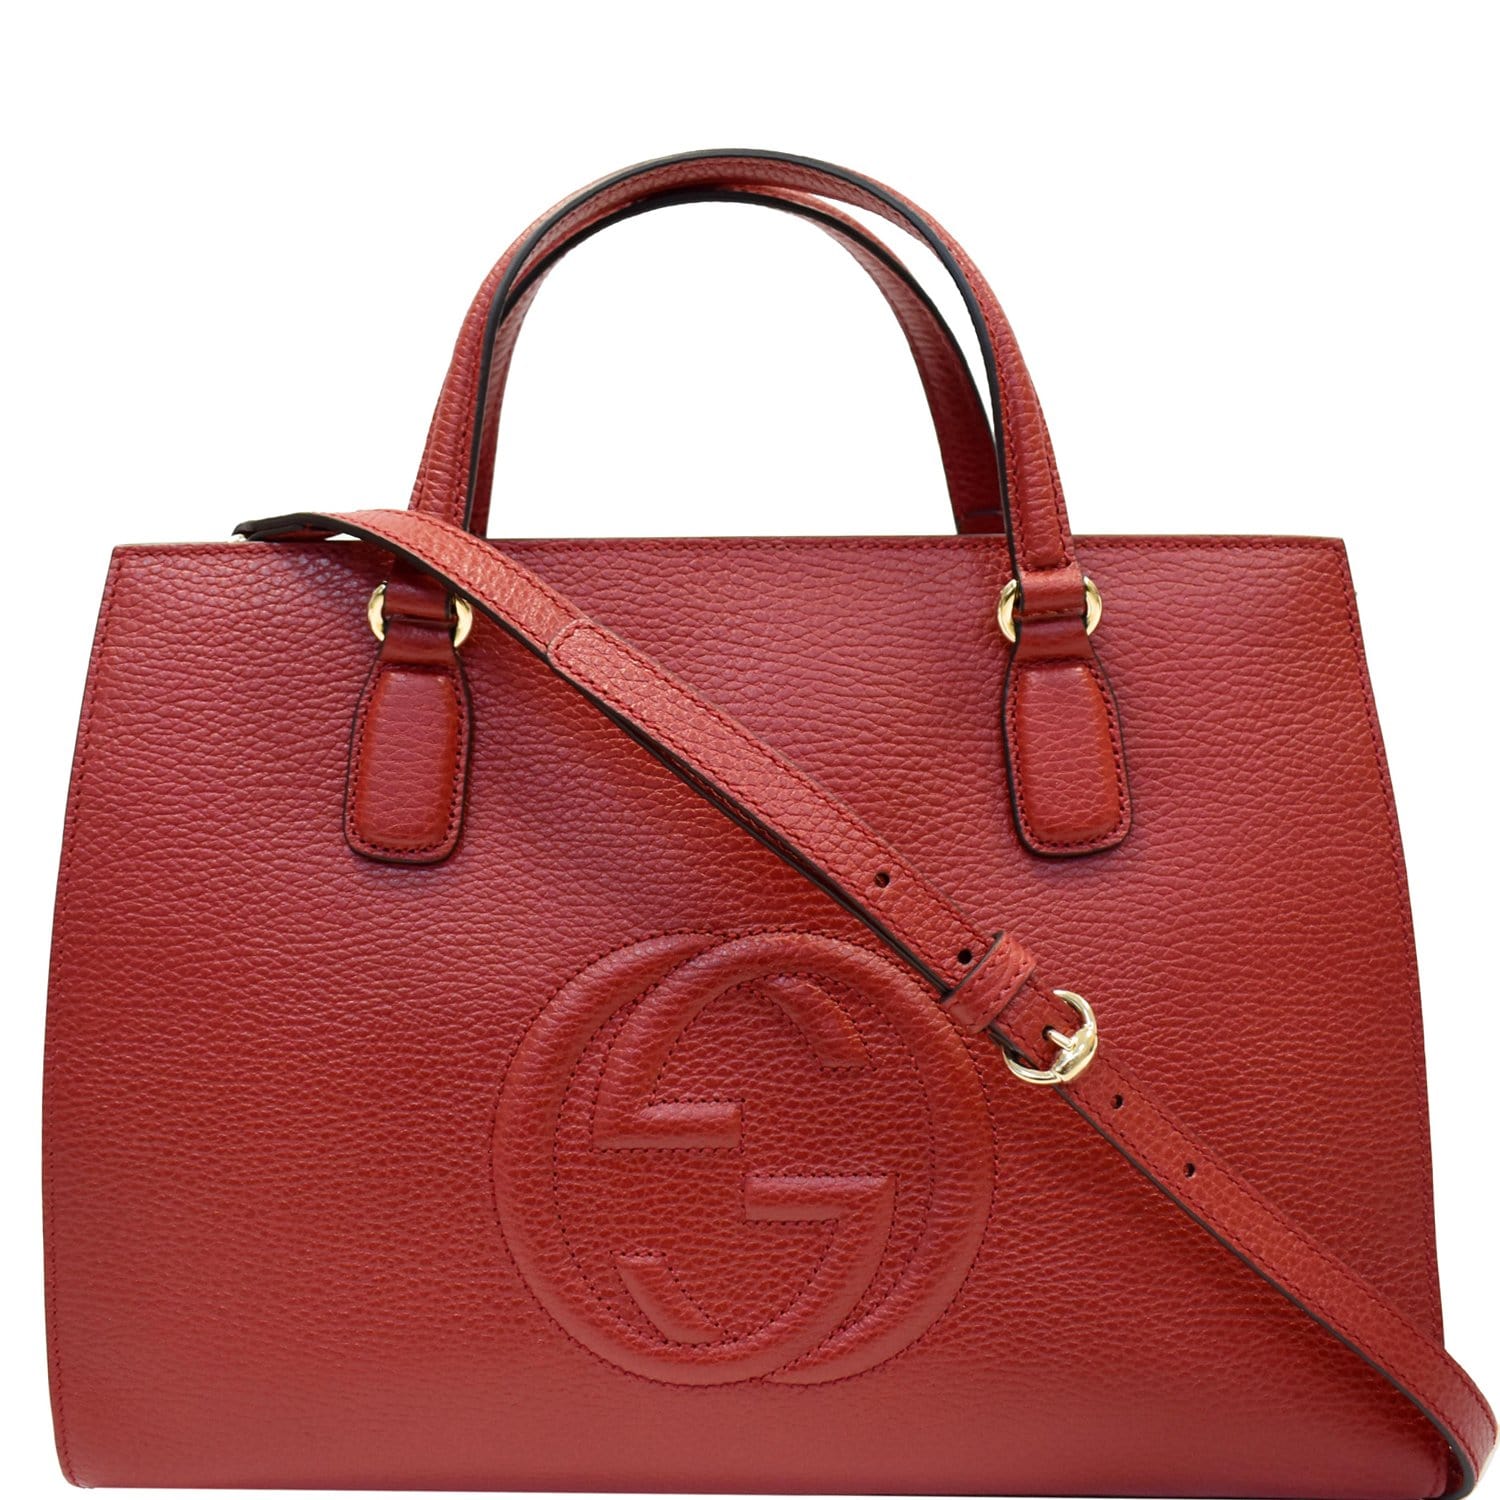 Gucci - Soho Red Grained Leather Small Round Bag